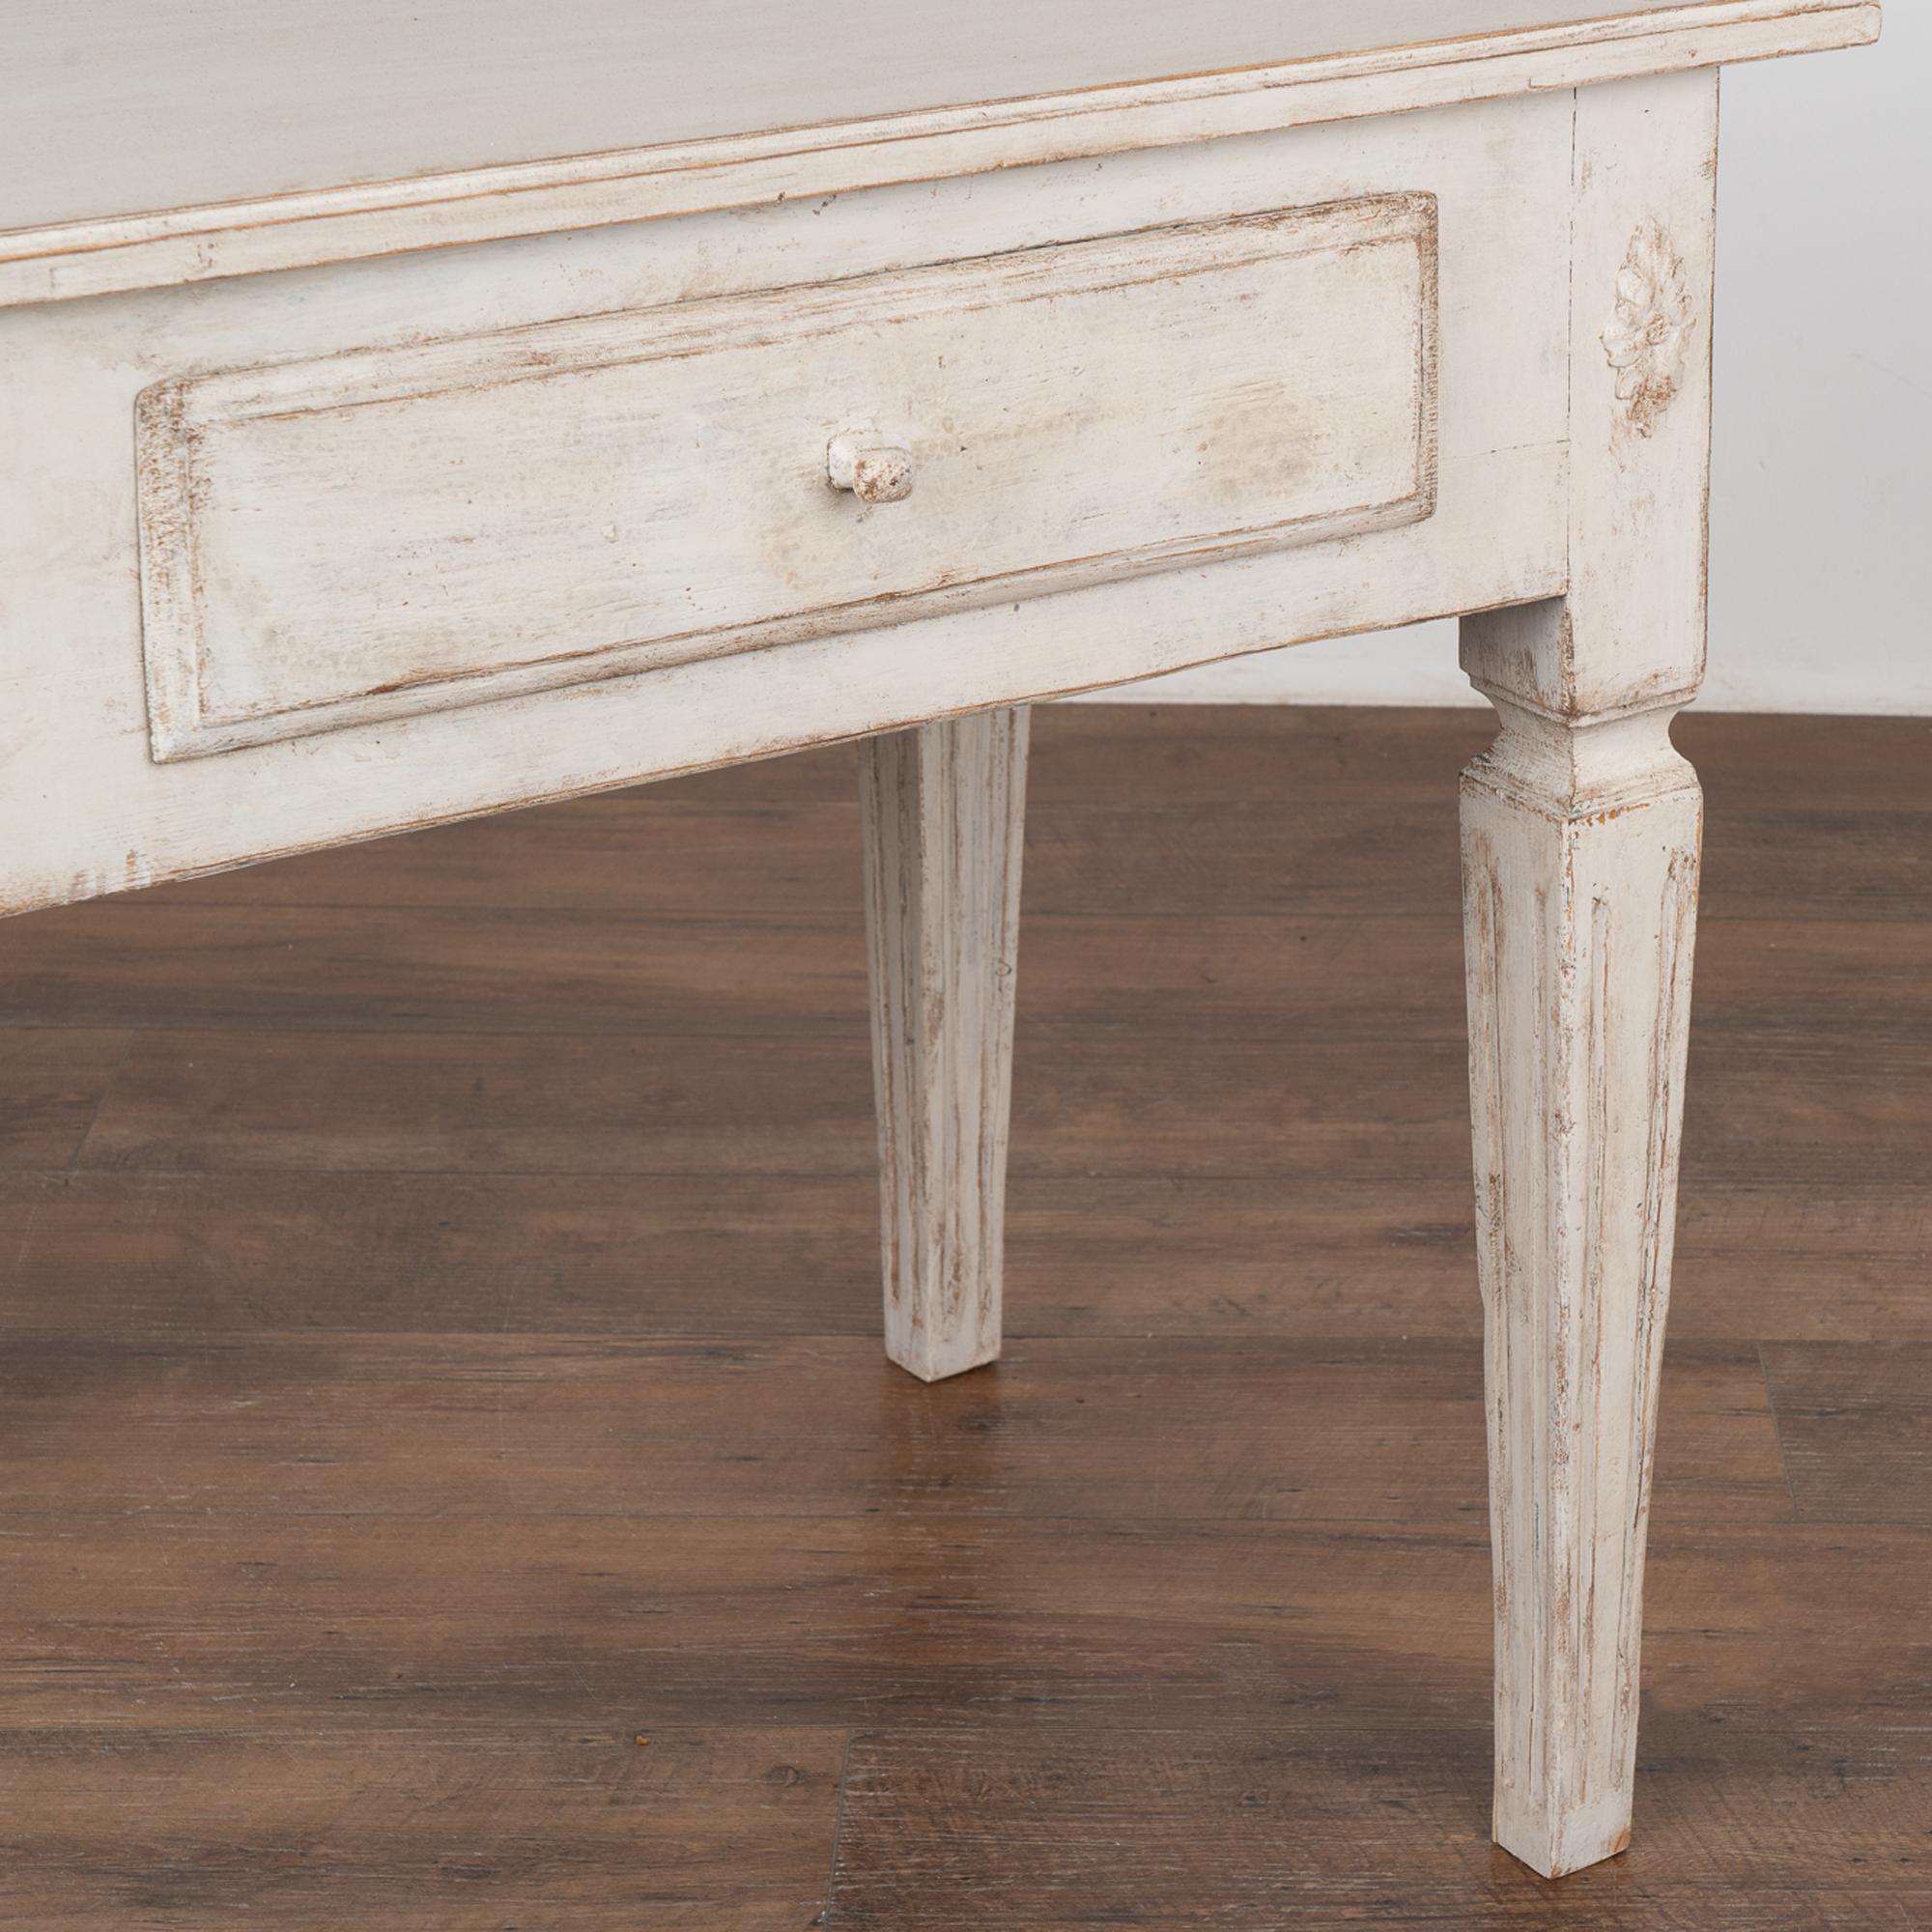 Wood Antique Swedish Gustavian White Painted Side Table With Drawer, circa 1840-60 For Sale